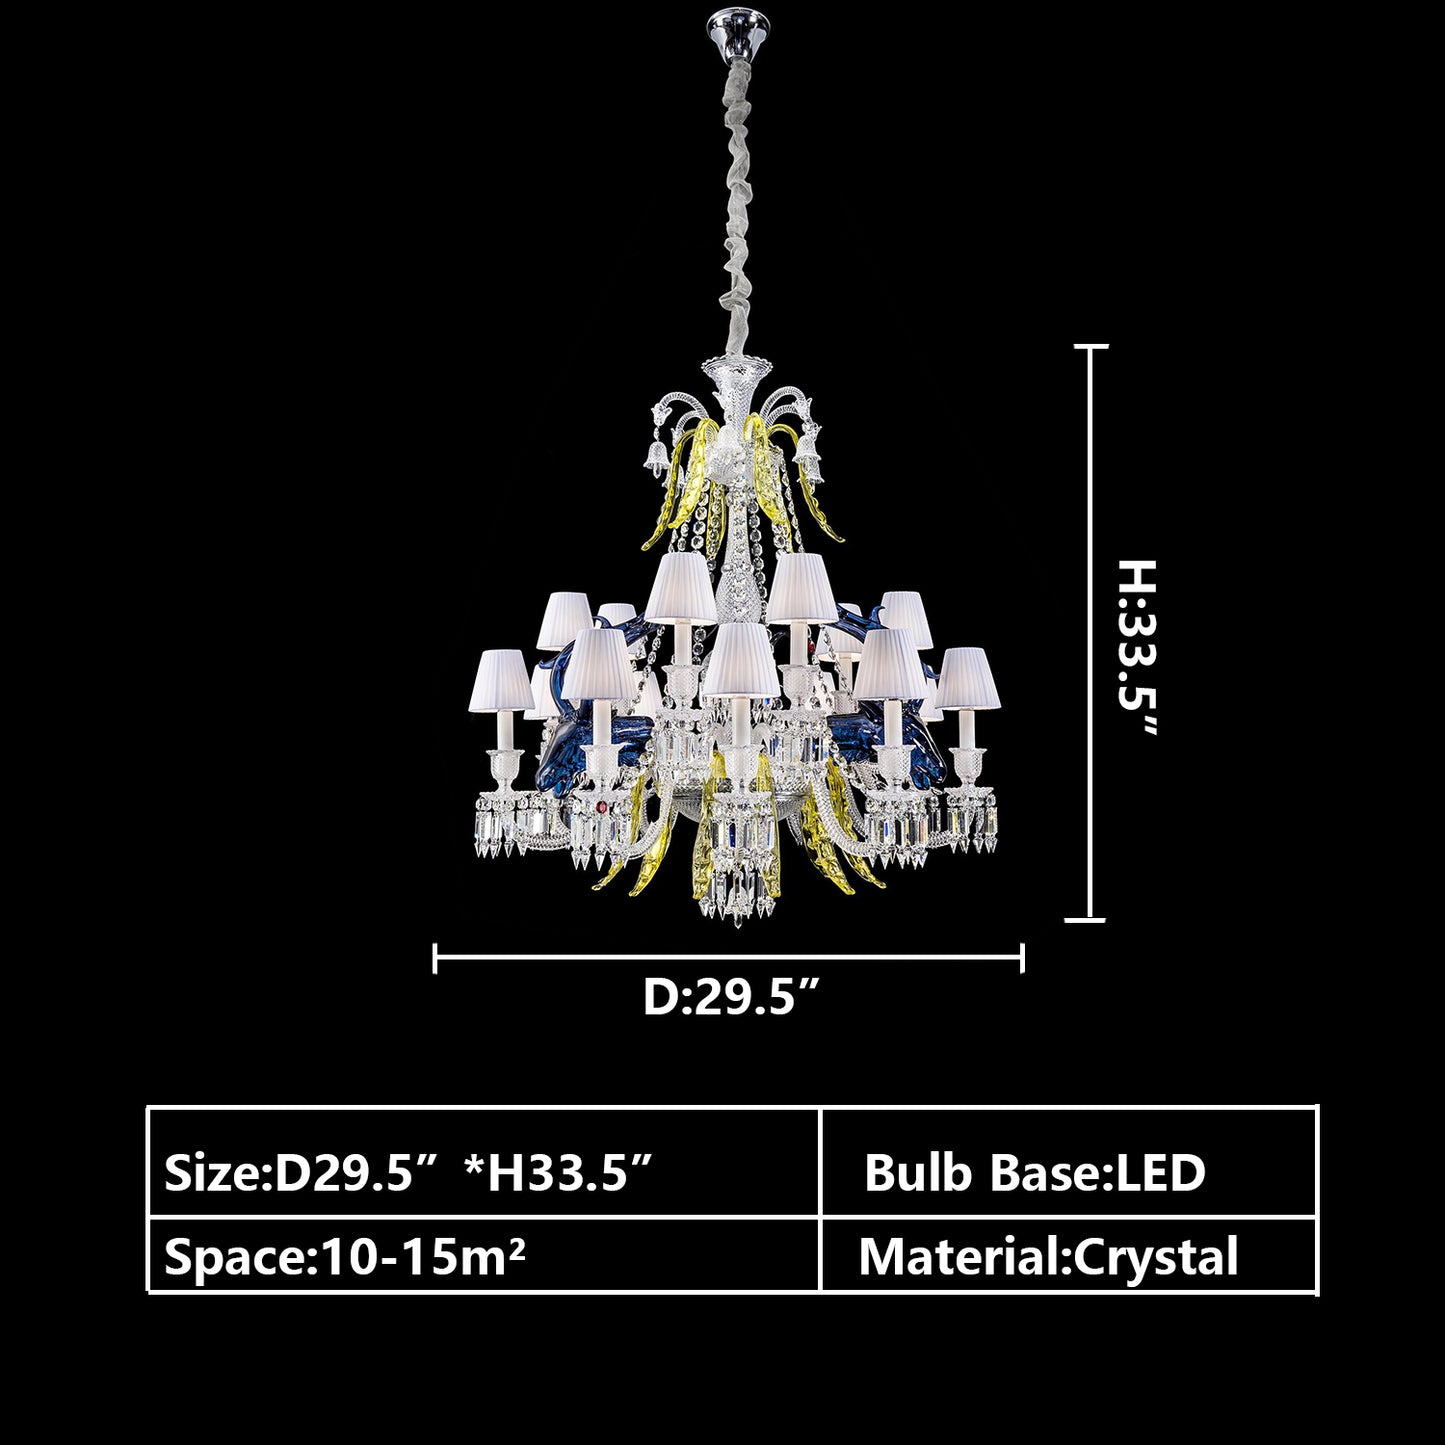 D29.5"*H33.5" chandelier,chandeliers,pendant,crystal,metal,glass,colorful,stained,yellow,blue,candle,glass shade,red,oversized,large,huge,big,luxury,living room,dining room,foyer,entrys,hallway,loft,stairs